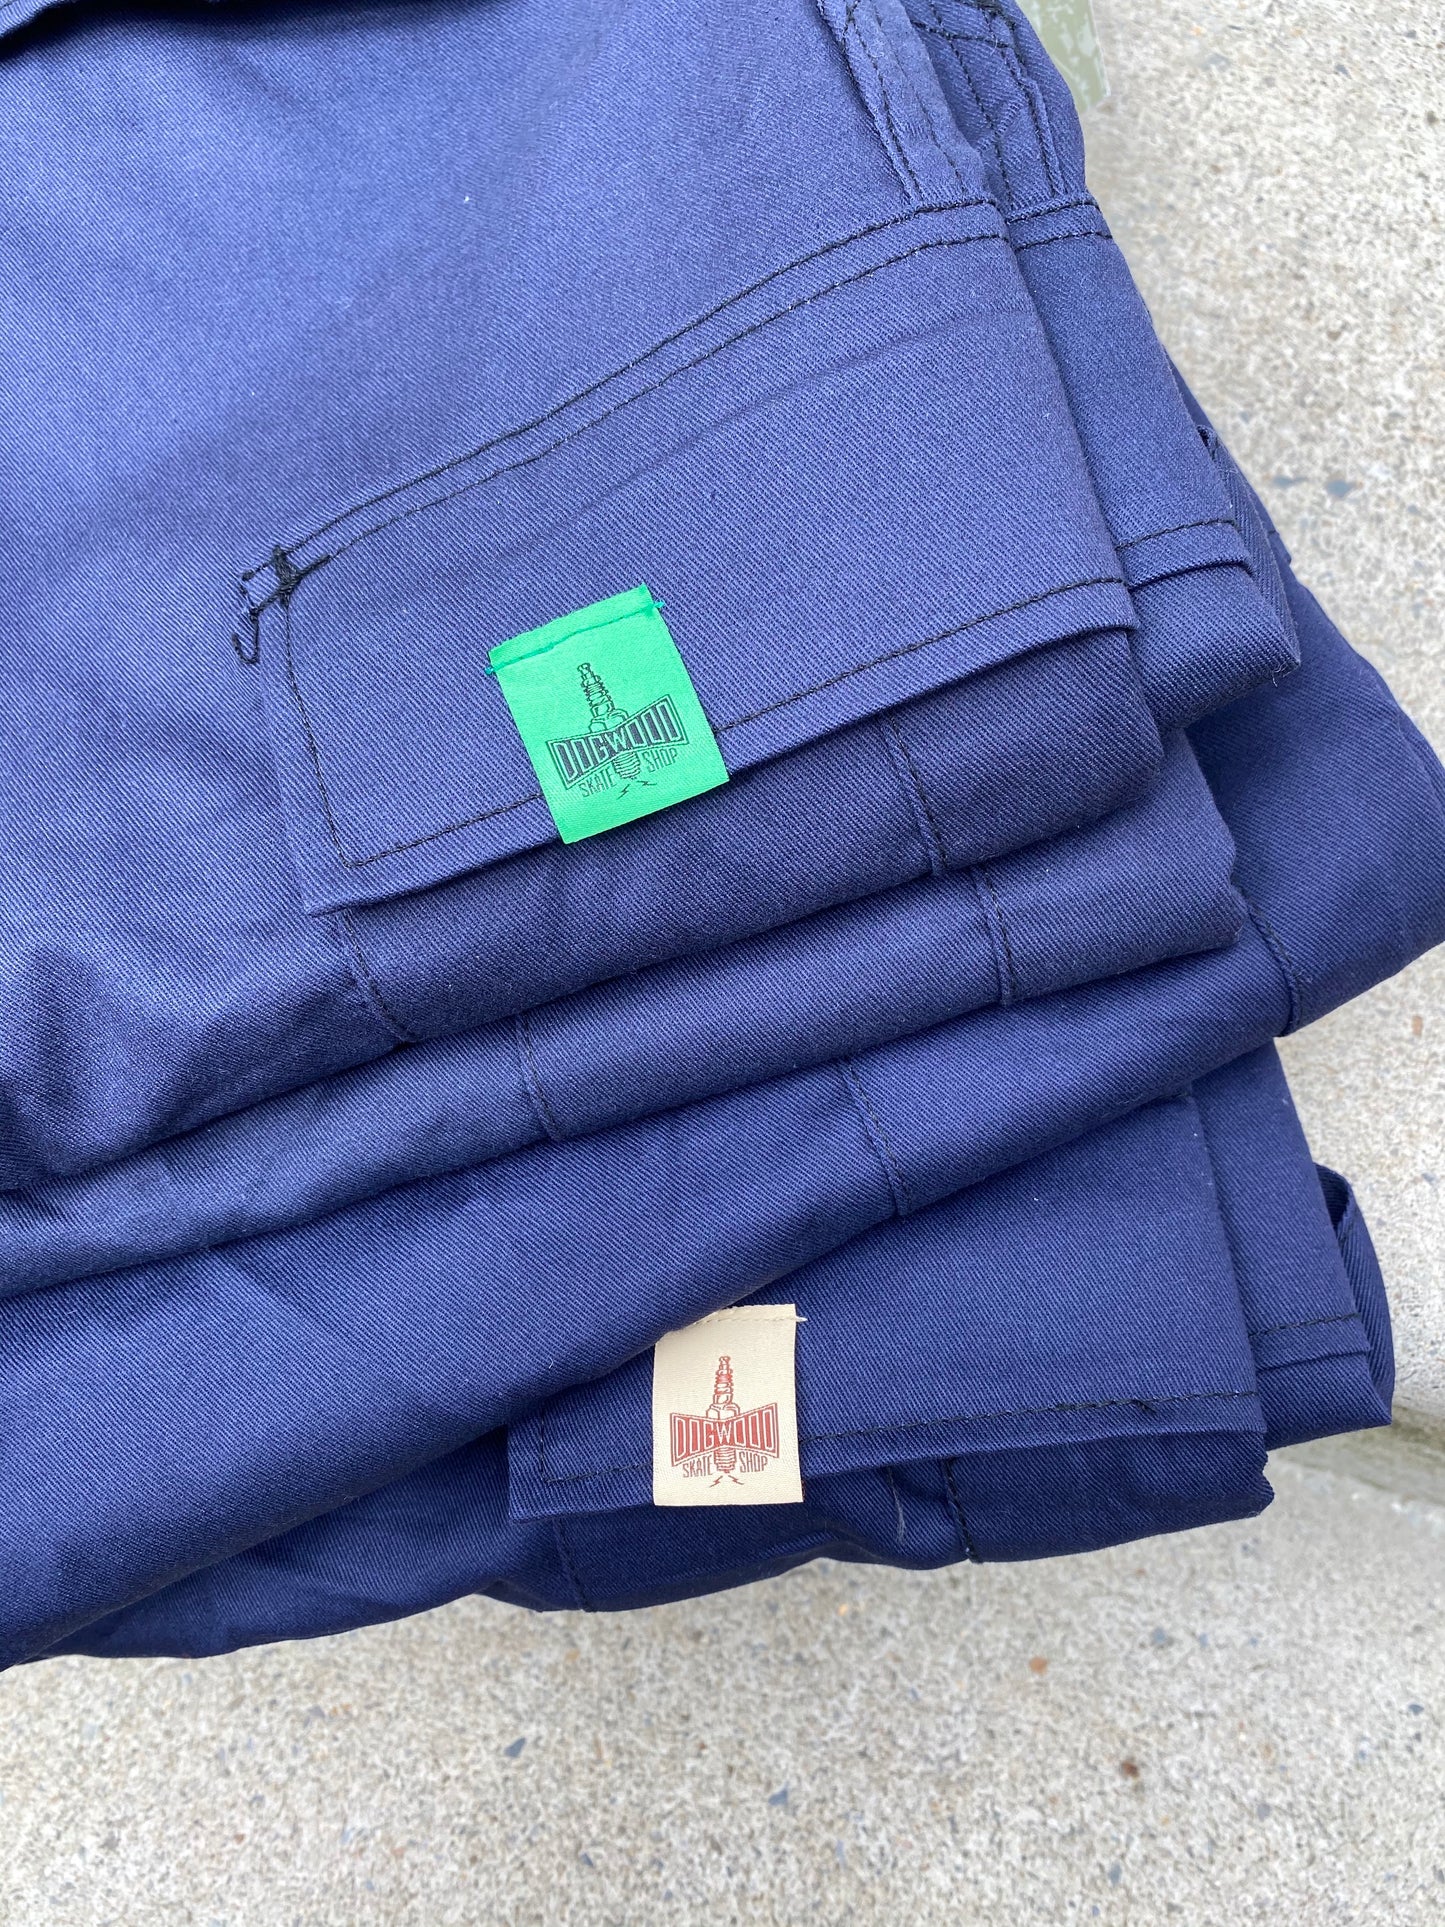 Plug Bdu Cargo Pants Navy Blue/Tag Color Assorted (size options listed)